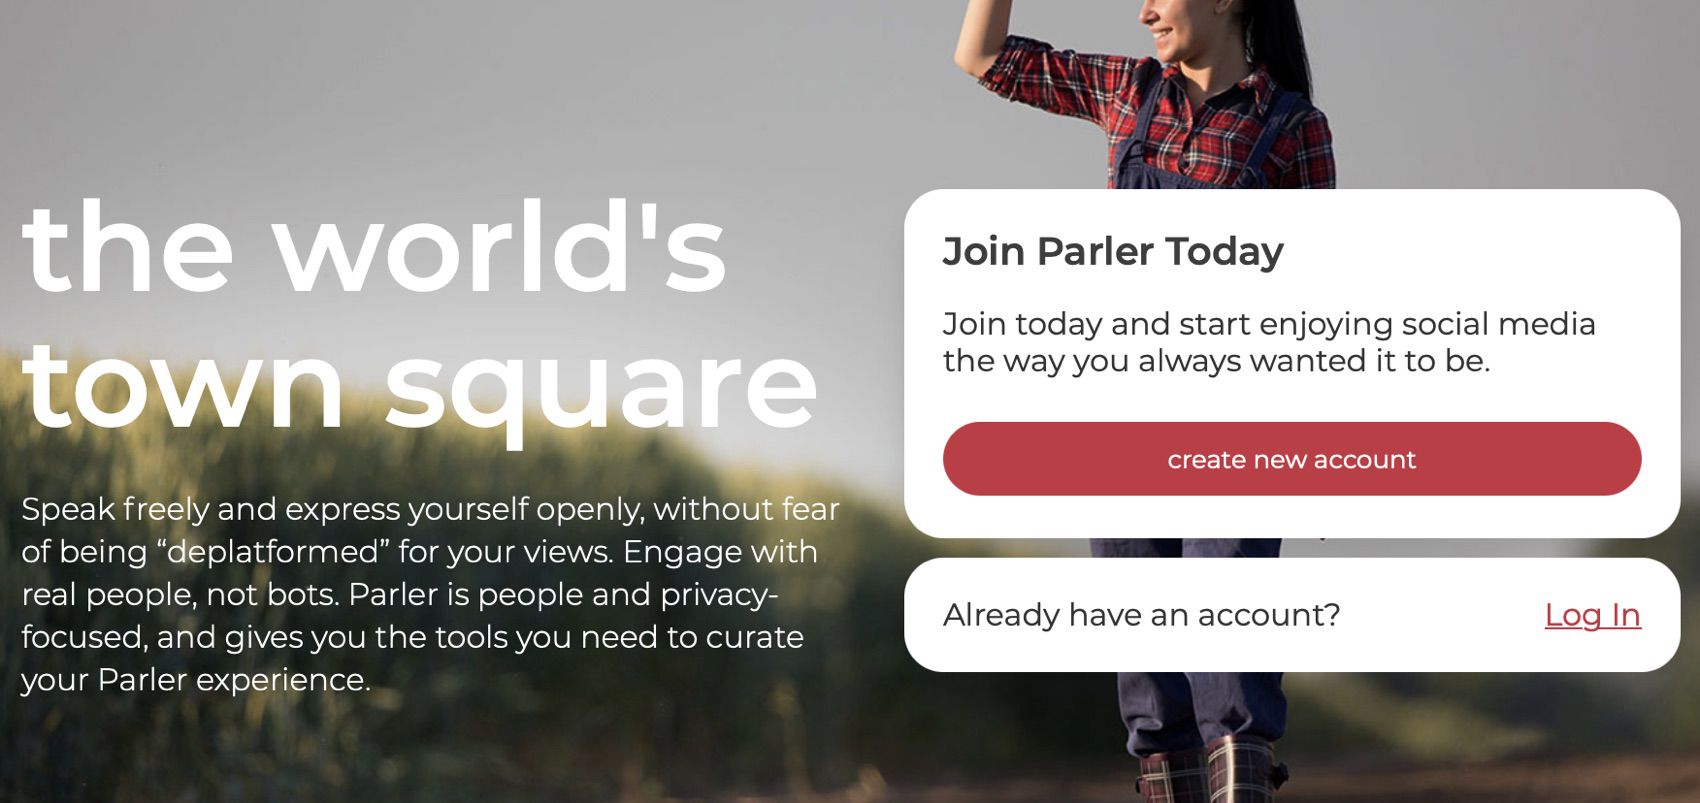 Apple is threatening to ban Parler from the App Store because Twitter is banning Donald Trump